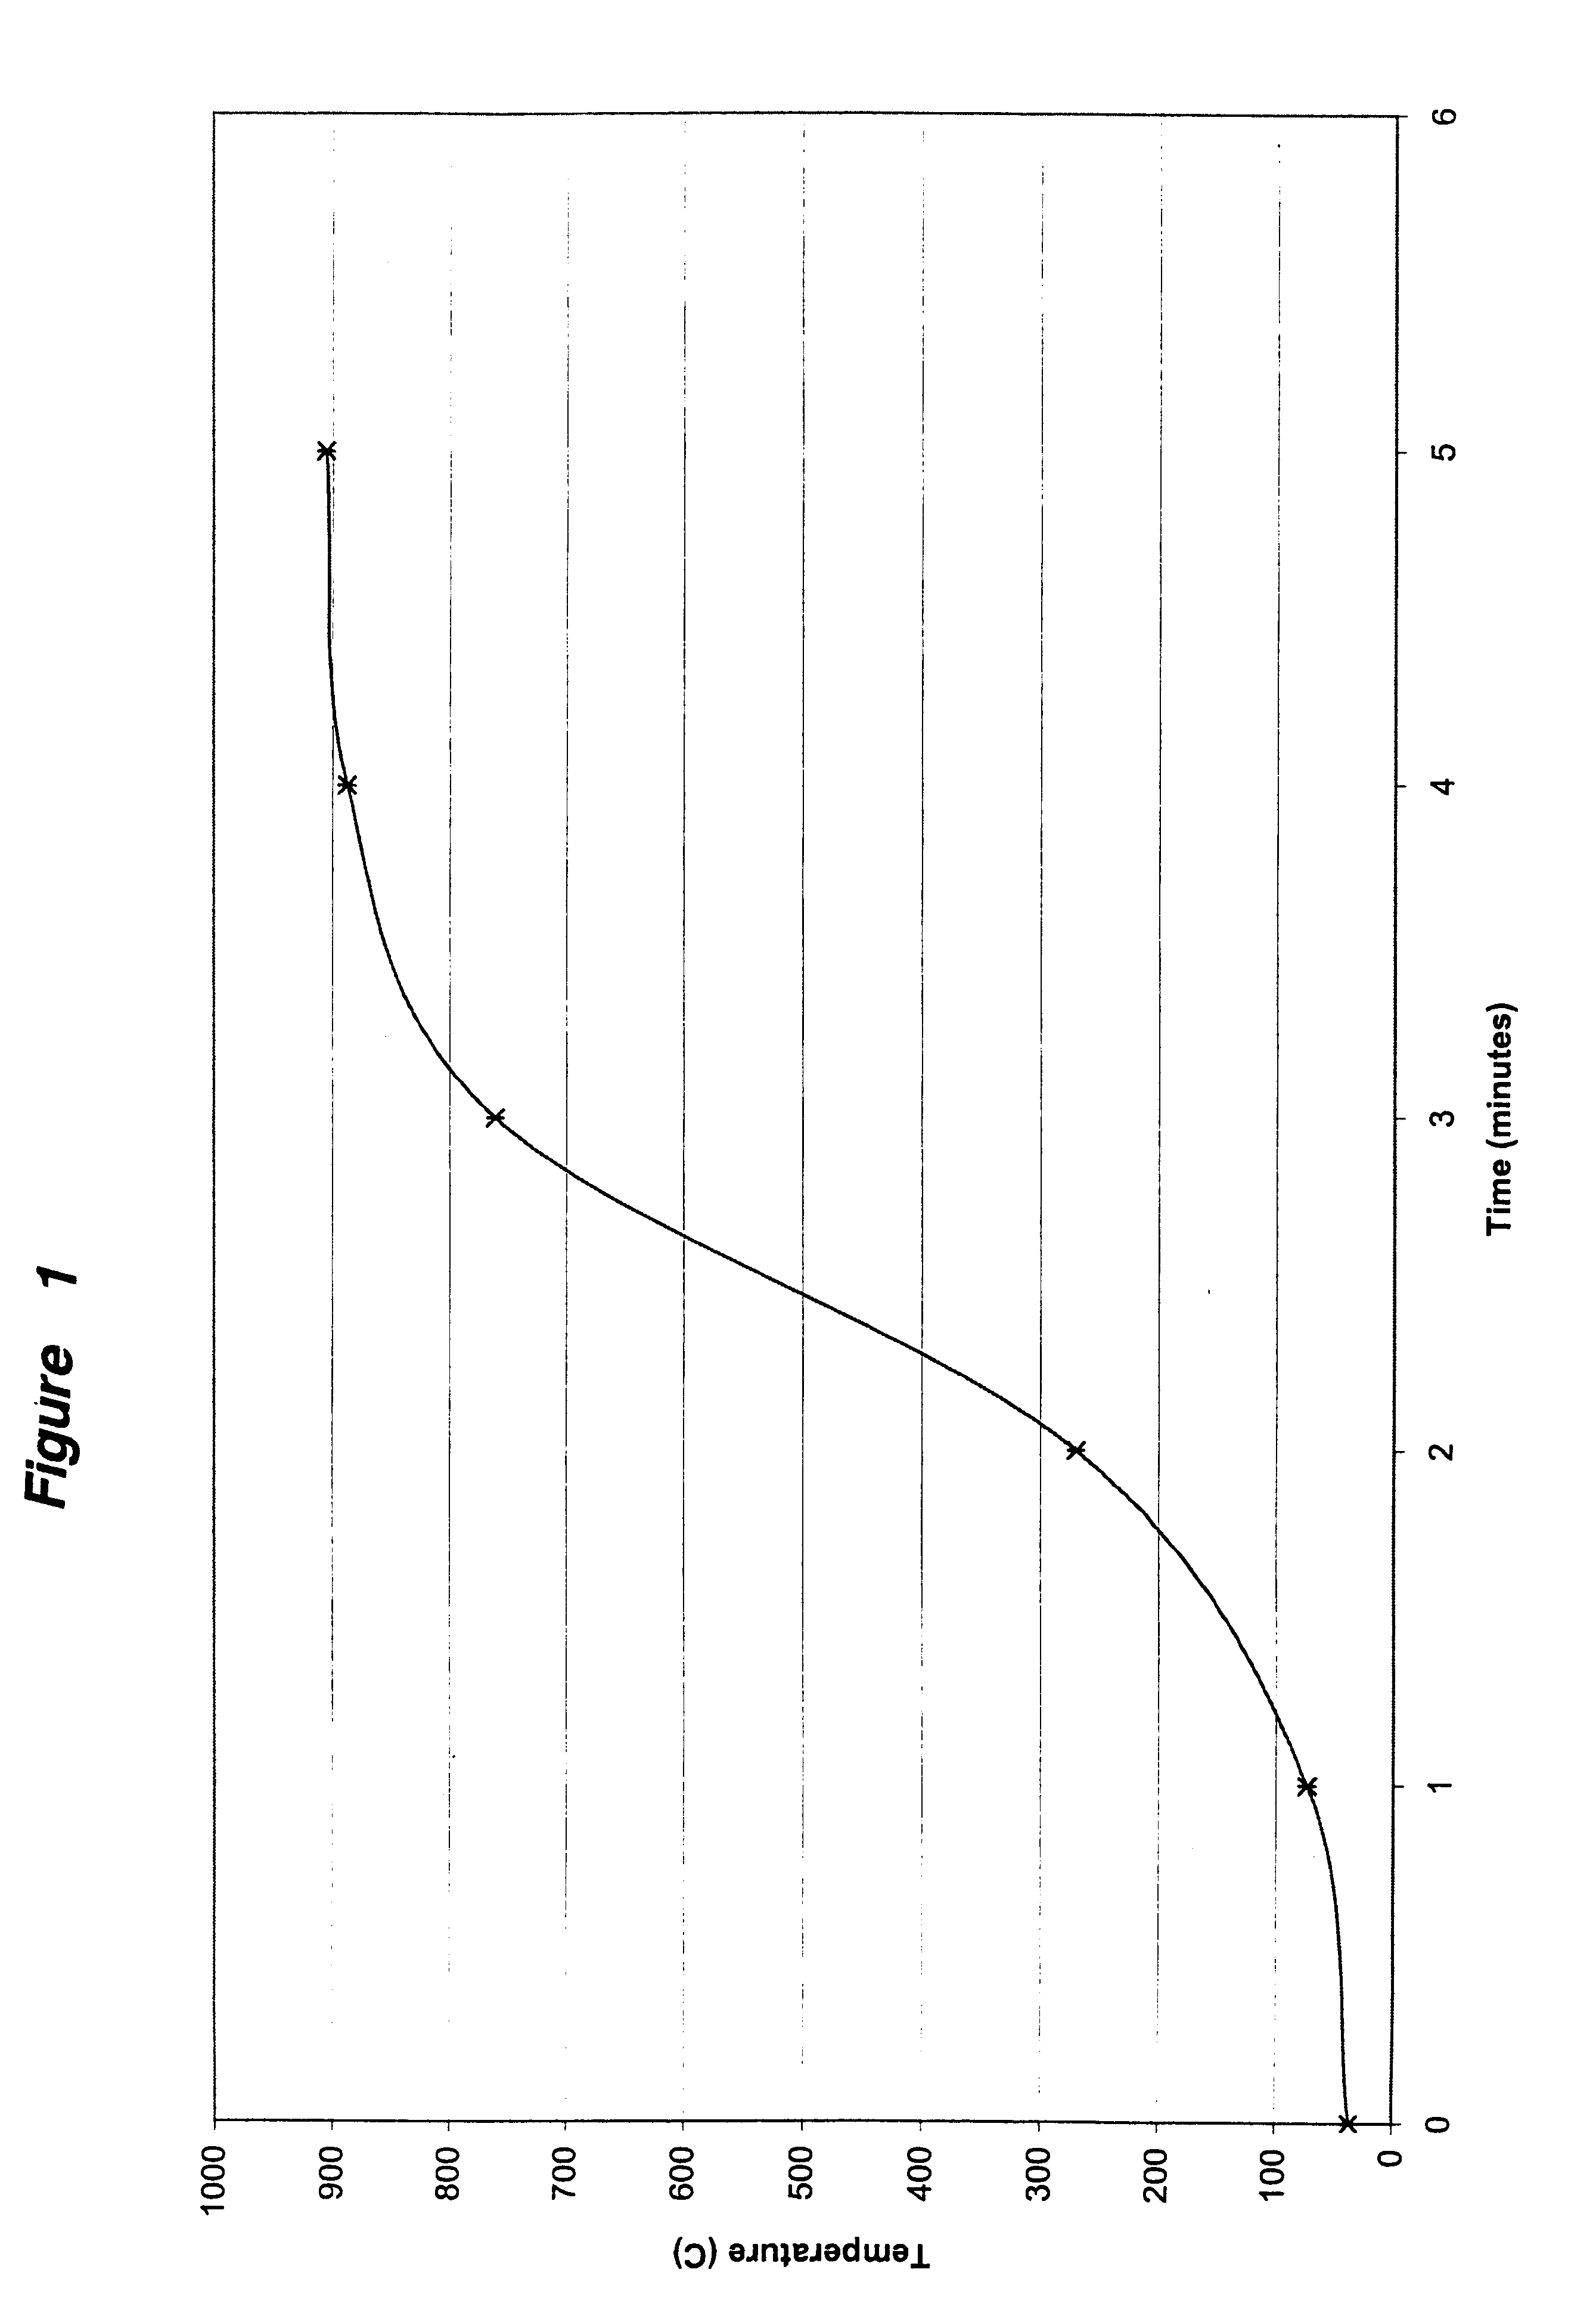 Microwave regenerated diesel particular filter and method of making the same